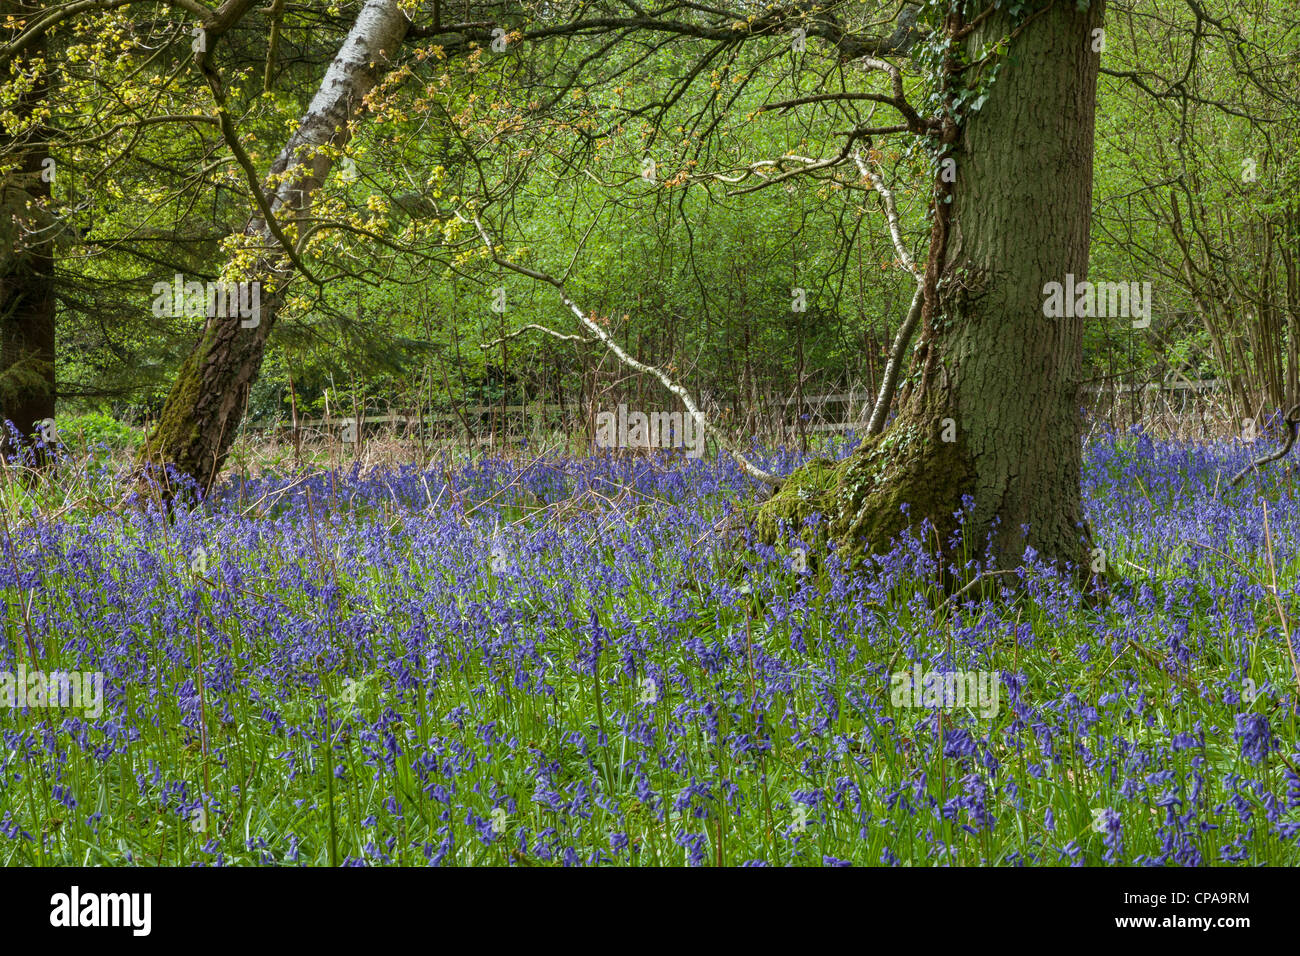 Bluebells (Hyacinthoides non-scripta) in a wood in Surrey, England. Stock Photo